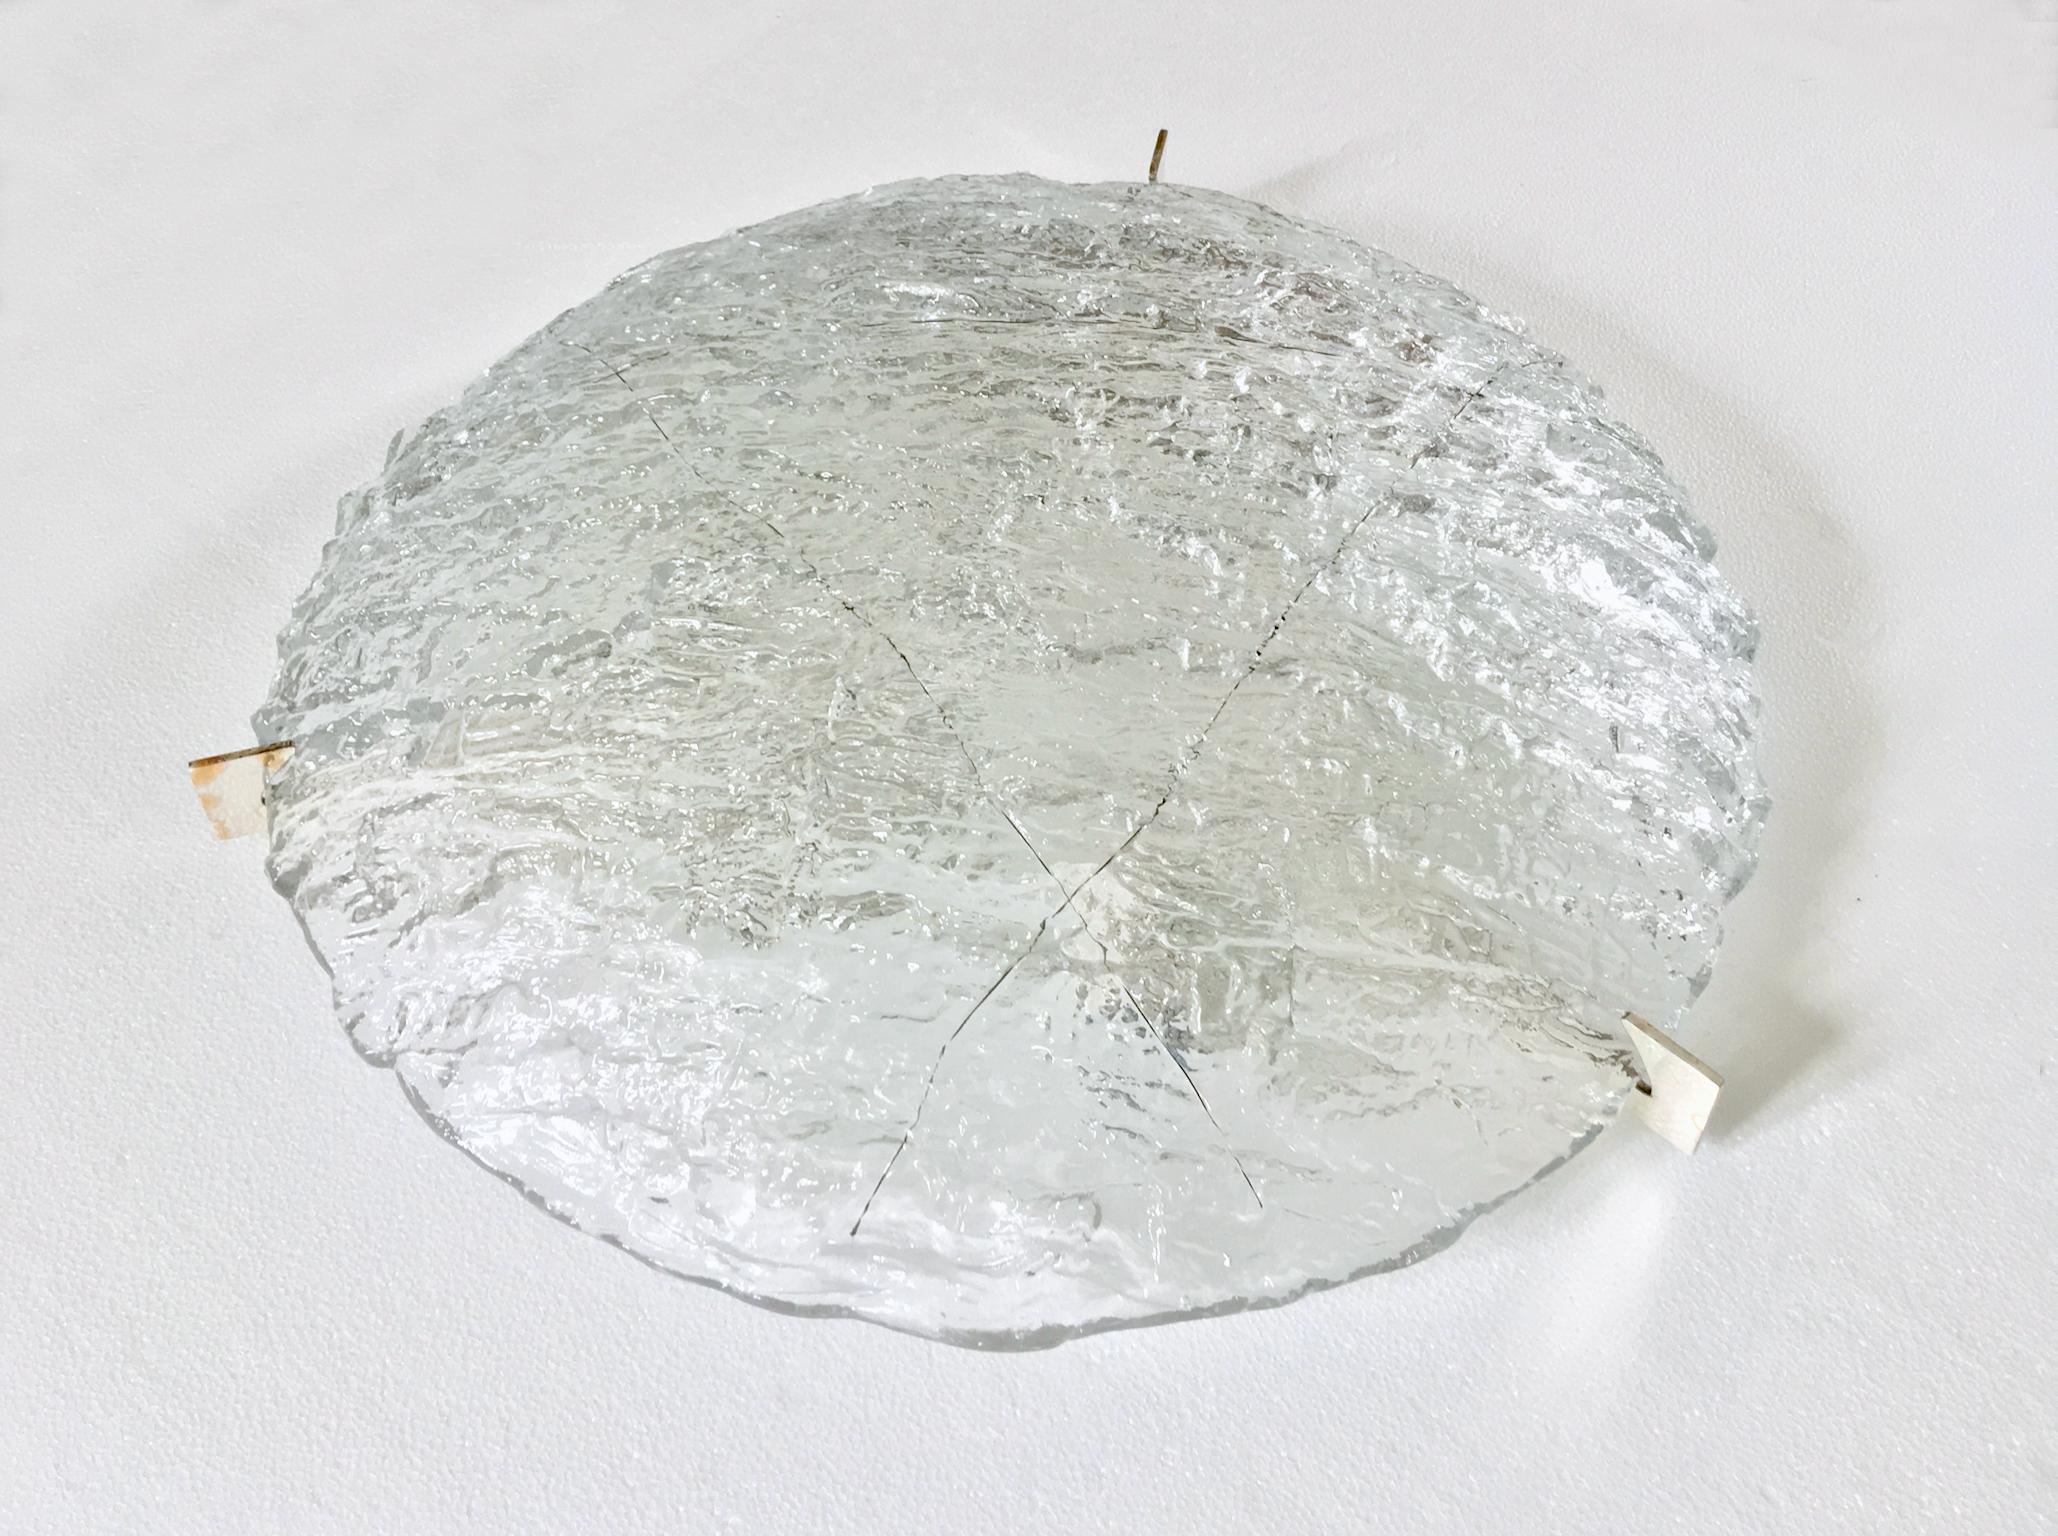 Large circular glass flush mount in heavily textured clear glass by Kaiser, Germany, mid-20th century. The shade is made of a single piece of handcrafted textured clear glass, incorporating three metal wires and held in place by three silver-plated